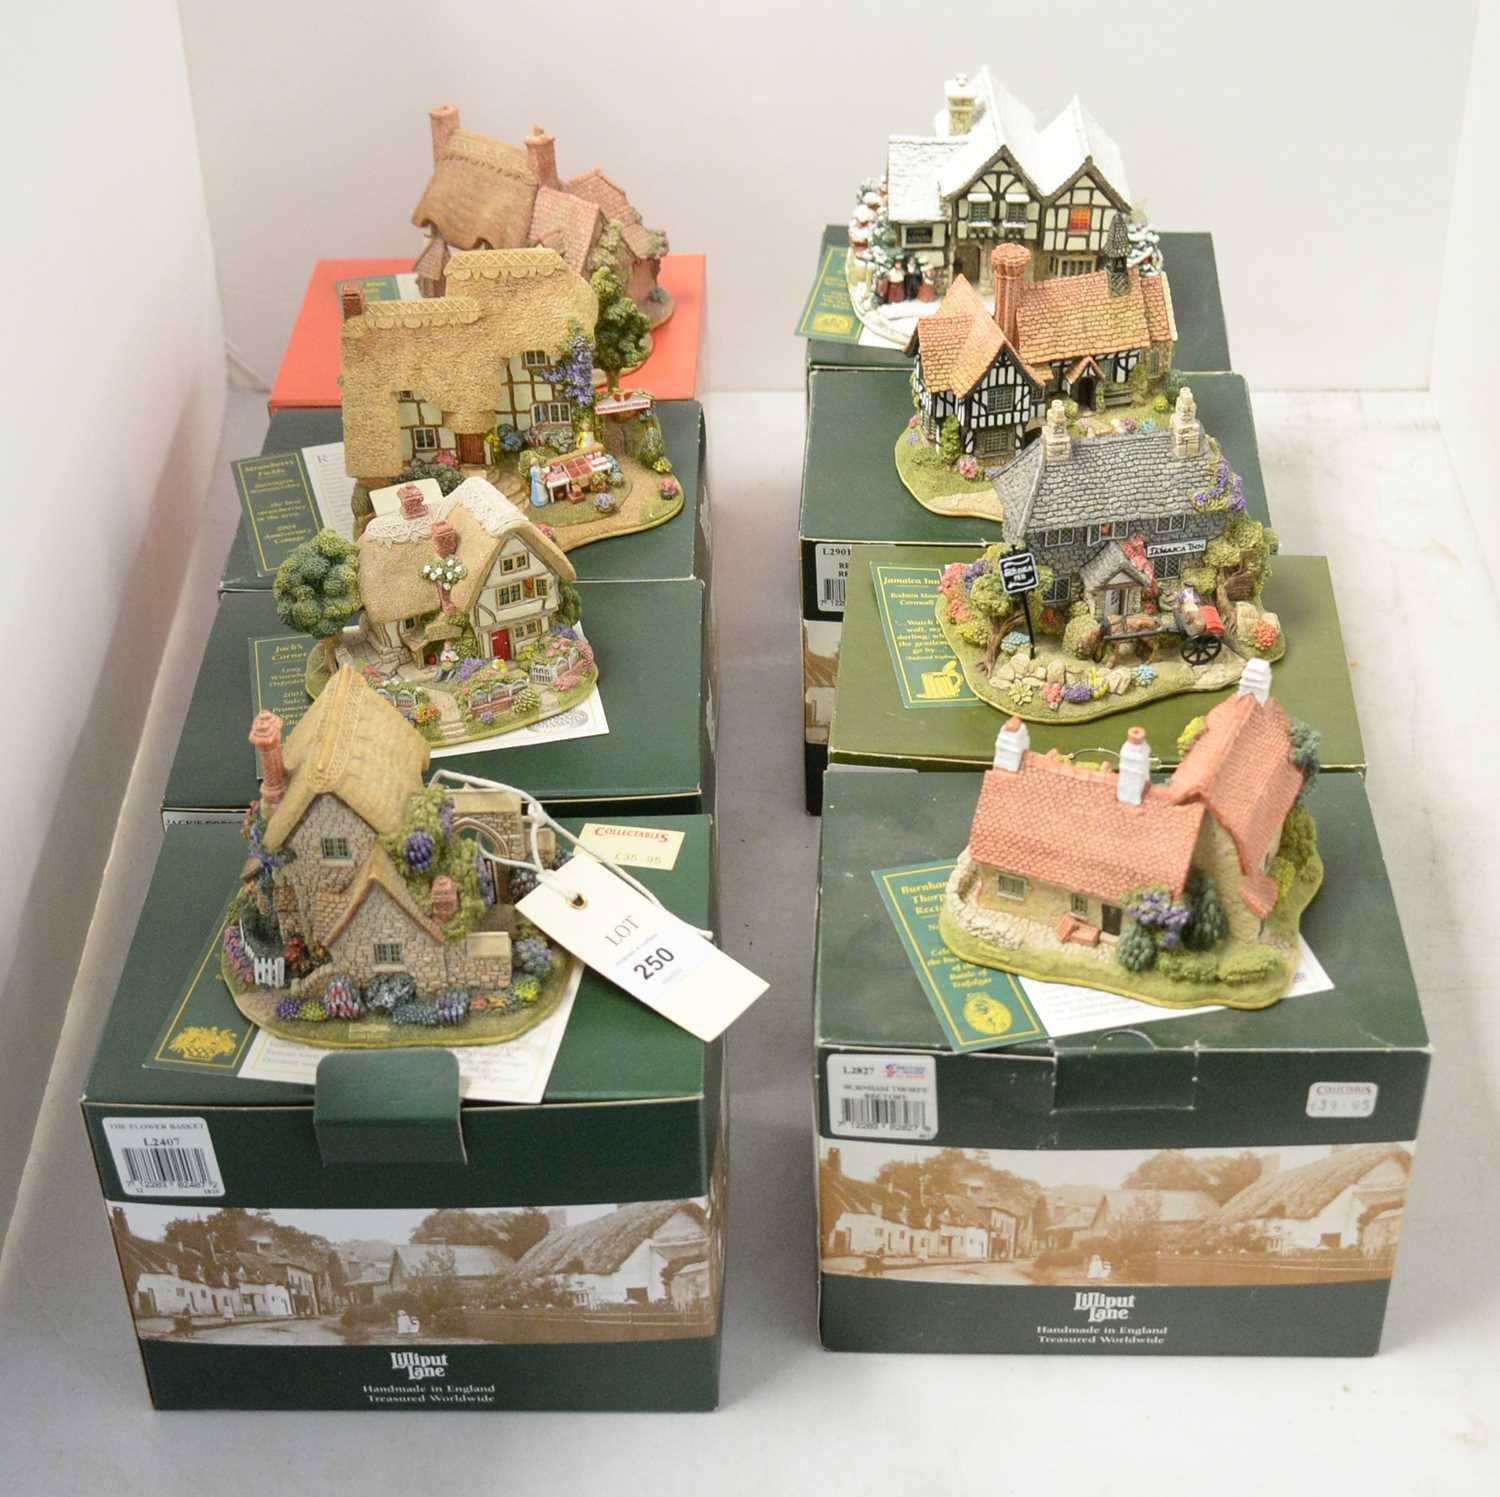 Lot 250 - A collection of Lilliput Lane collectible architectural sculptures.